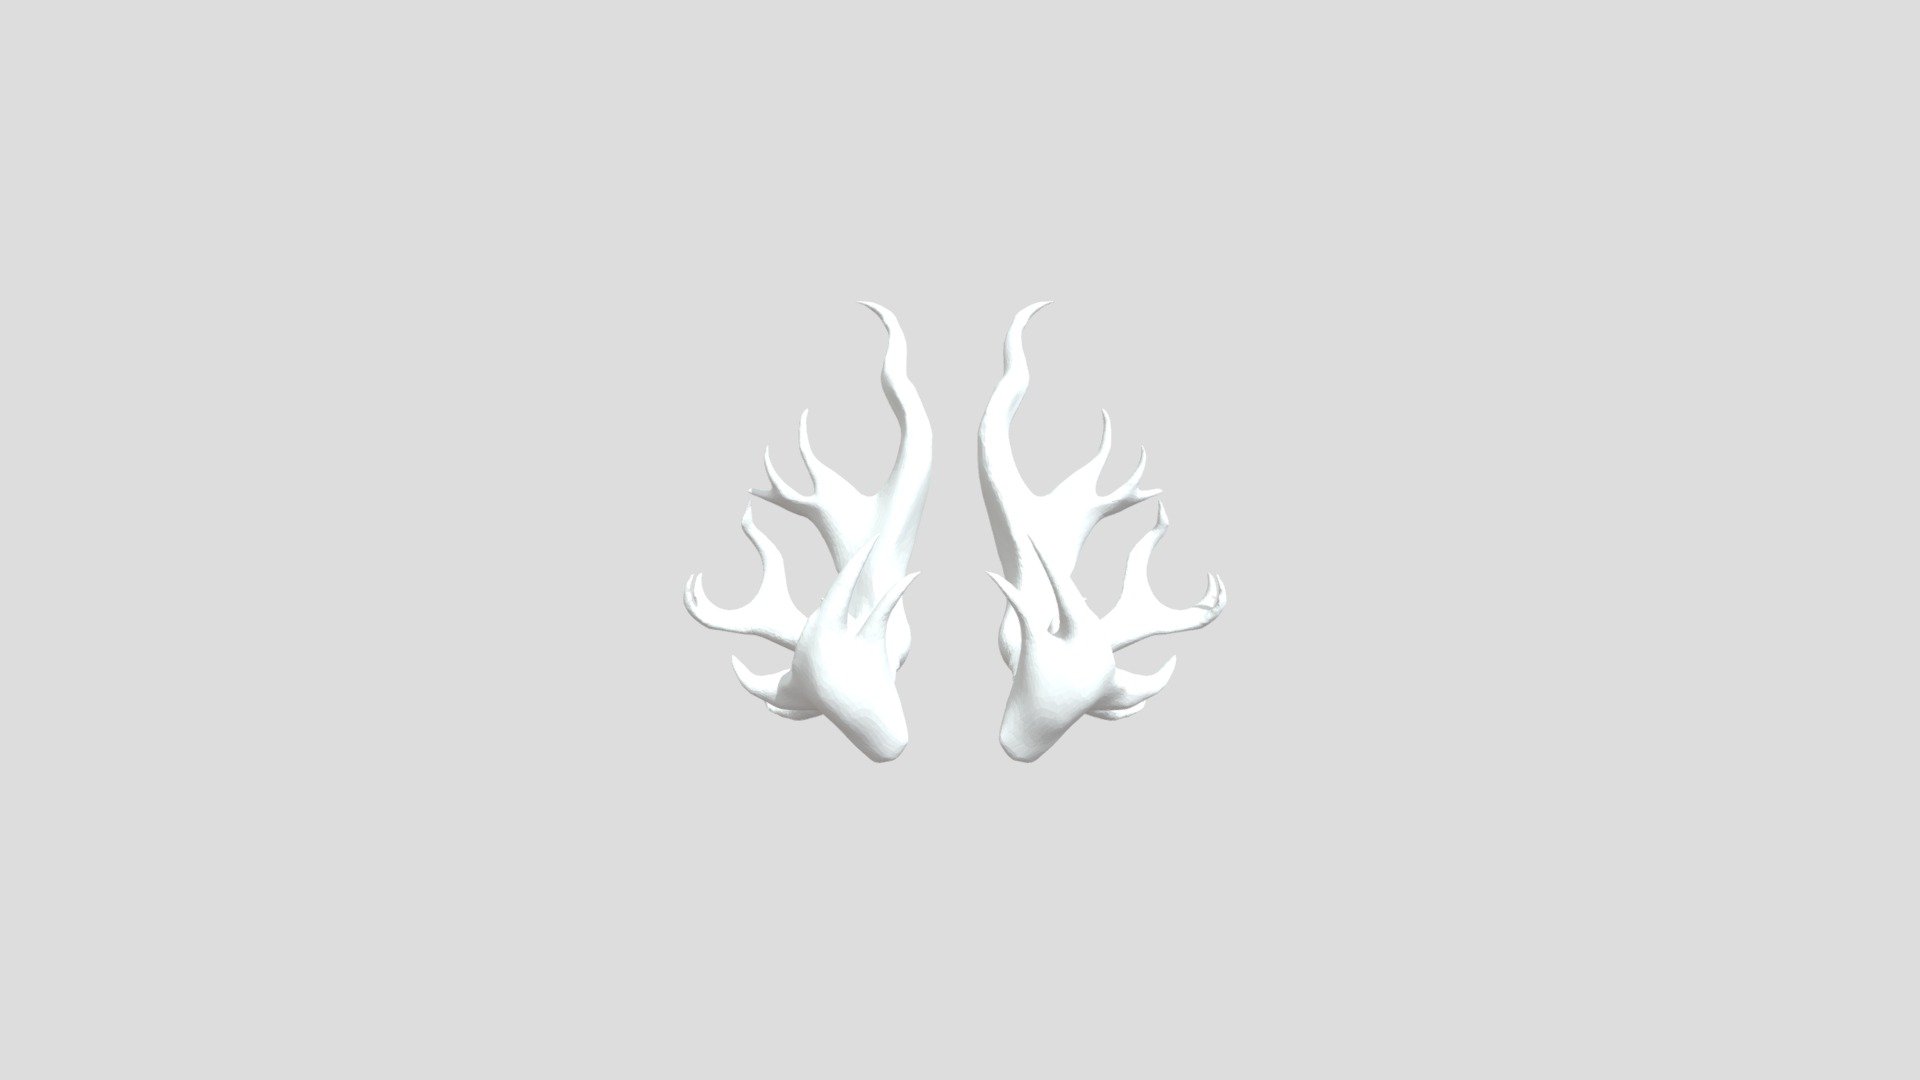 My first somewhat serious 3d model. 
It was made due to the fact that I was struggling to draw the shape of these horns at different angles in a concept sheet. So I spent a about 7 hours to figure out how everything works. Not without bugs and struggles, but I did it 3d model